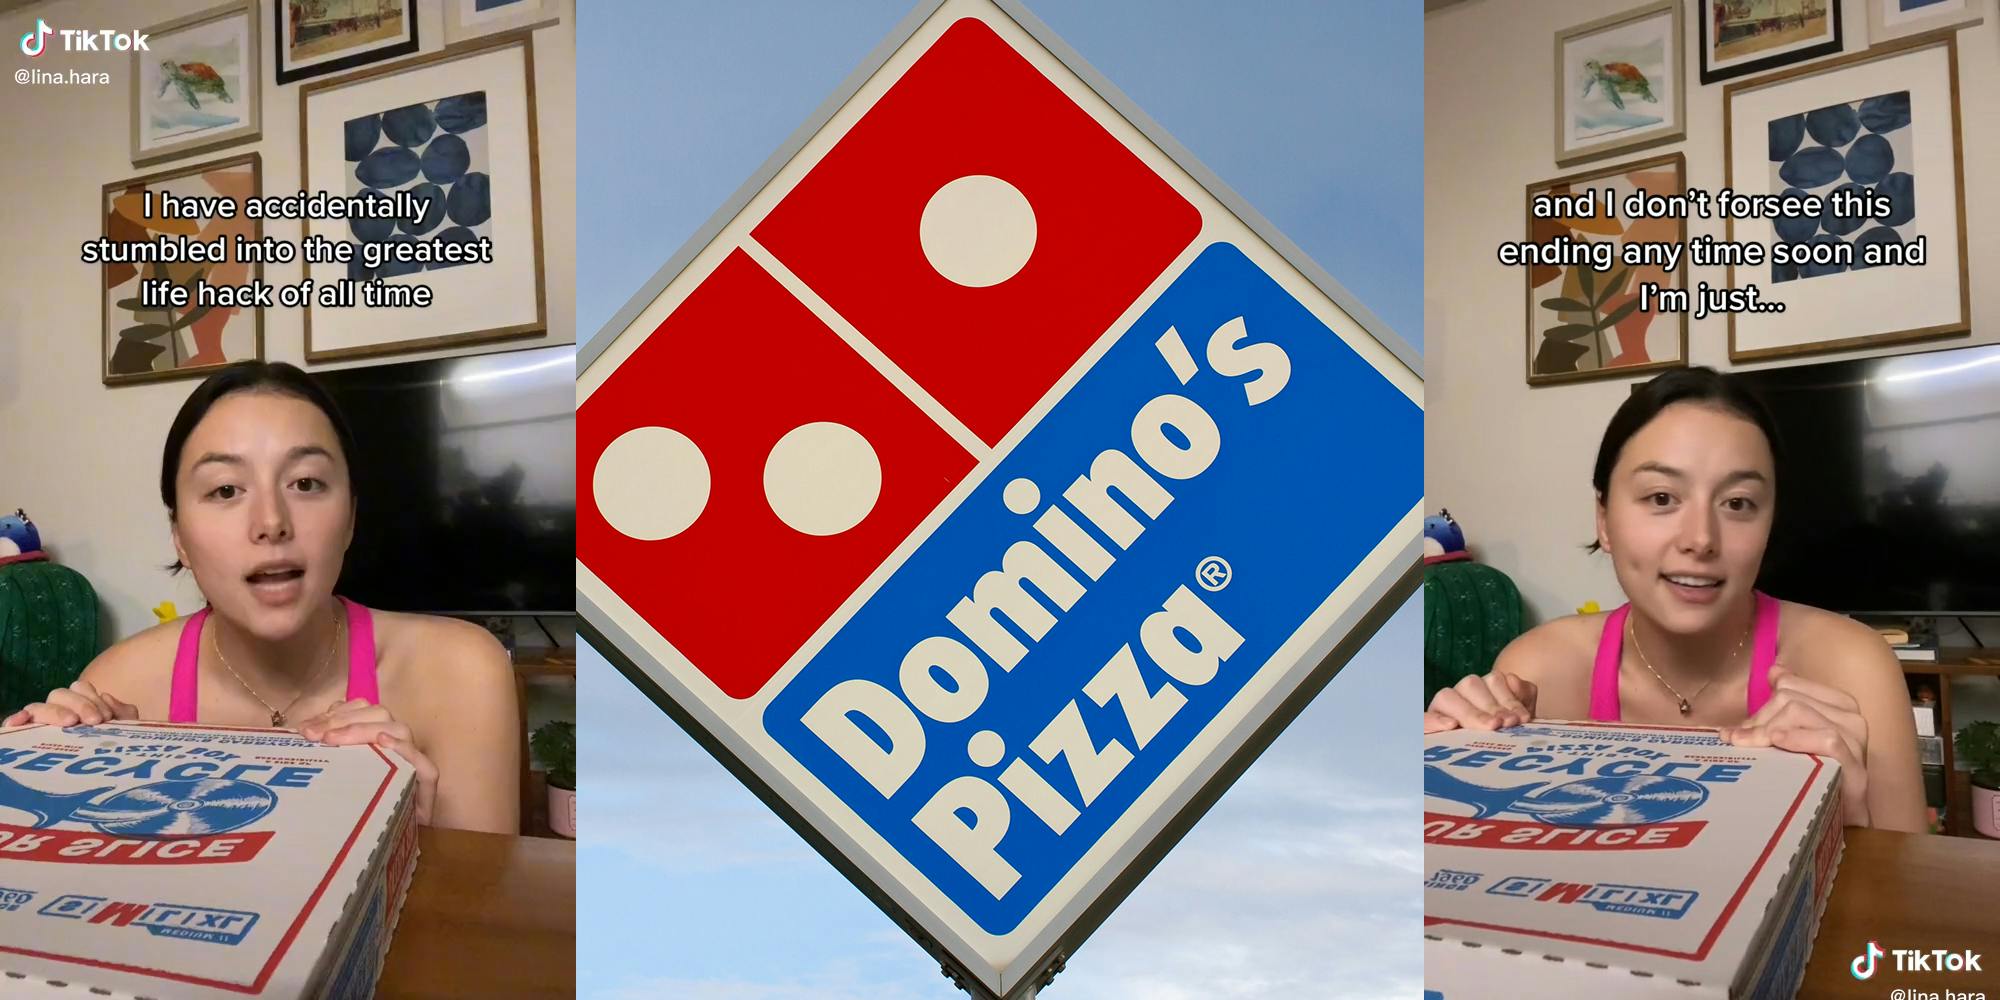 Volunteers Needed! Win Free Pizzas with Turkey Panic Button - Domino's Pizza  Blog